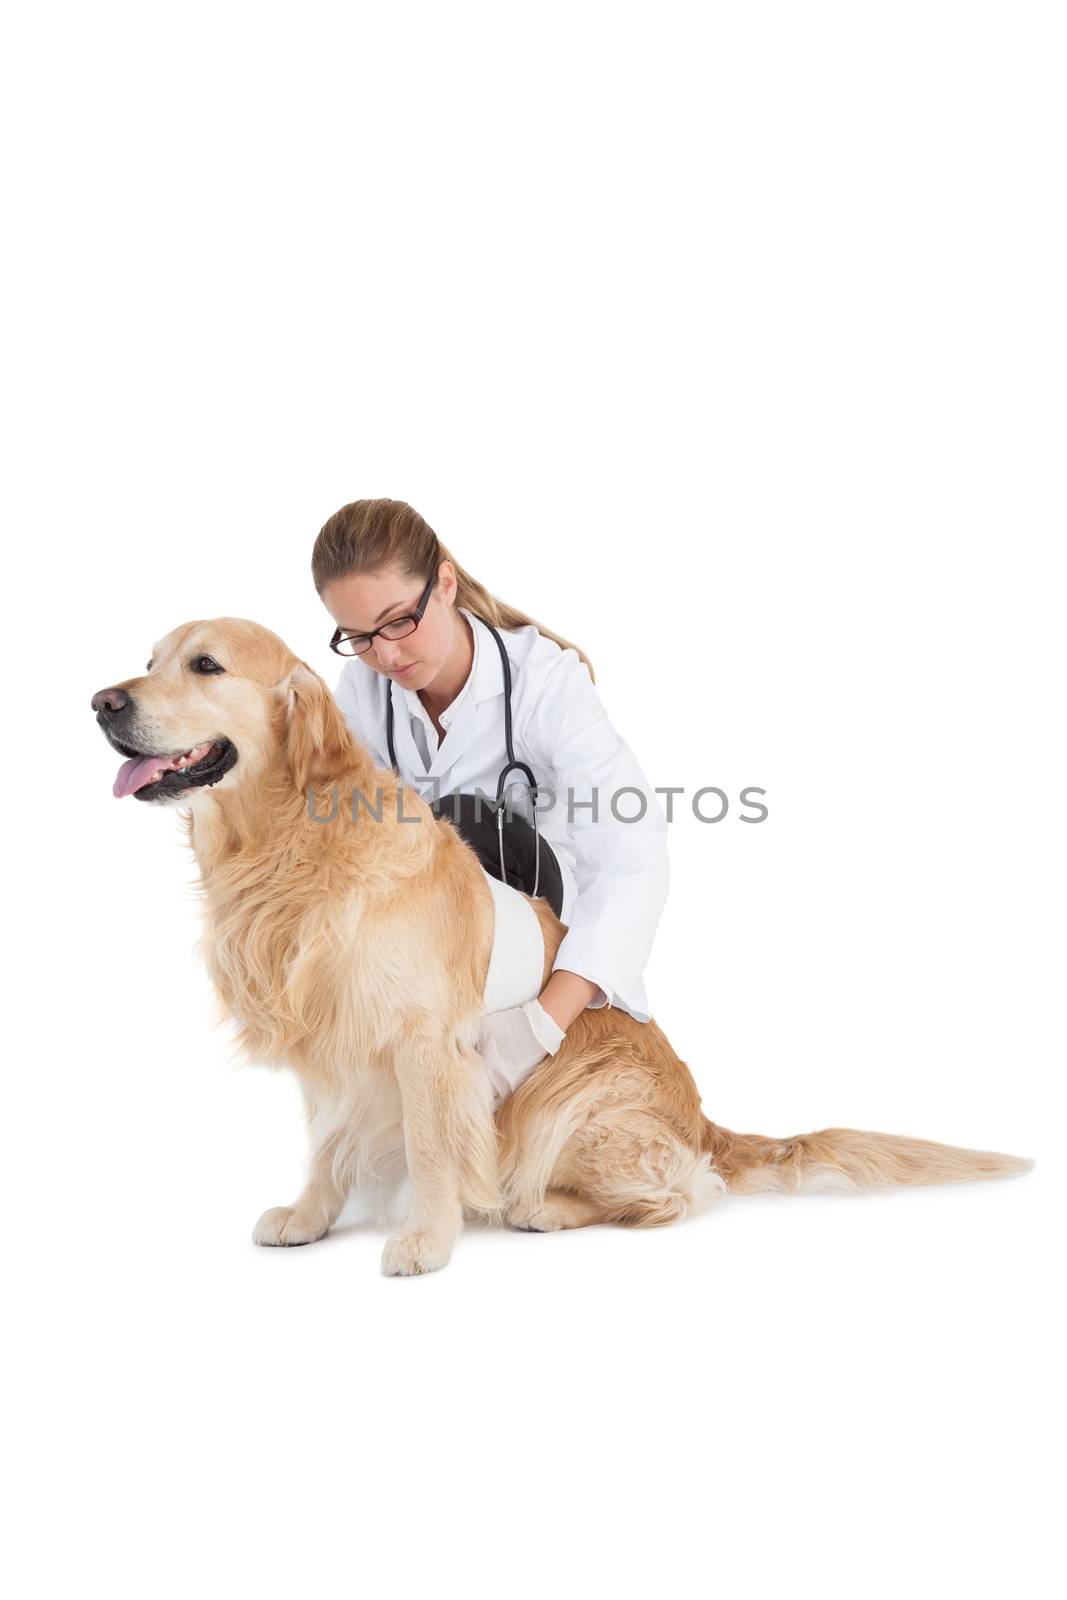 Smiling vet with a labrador on a white background